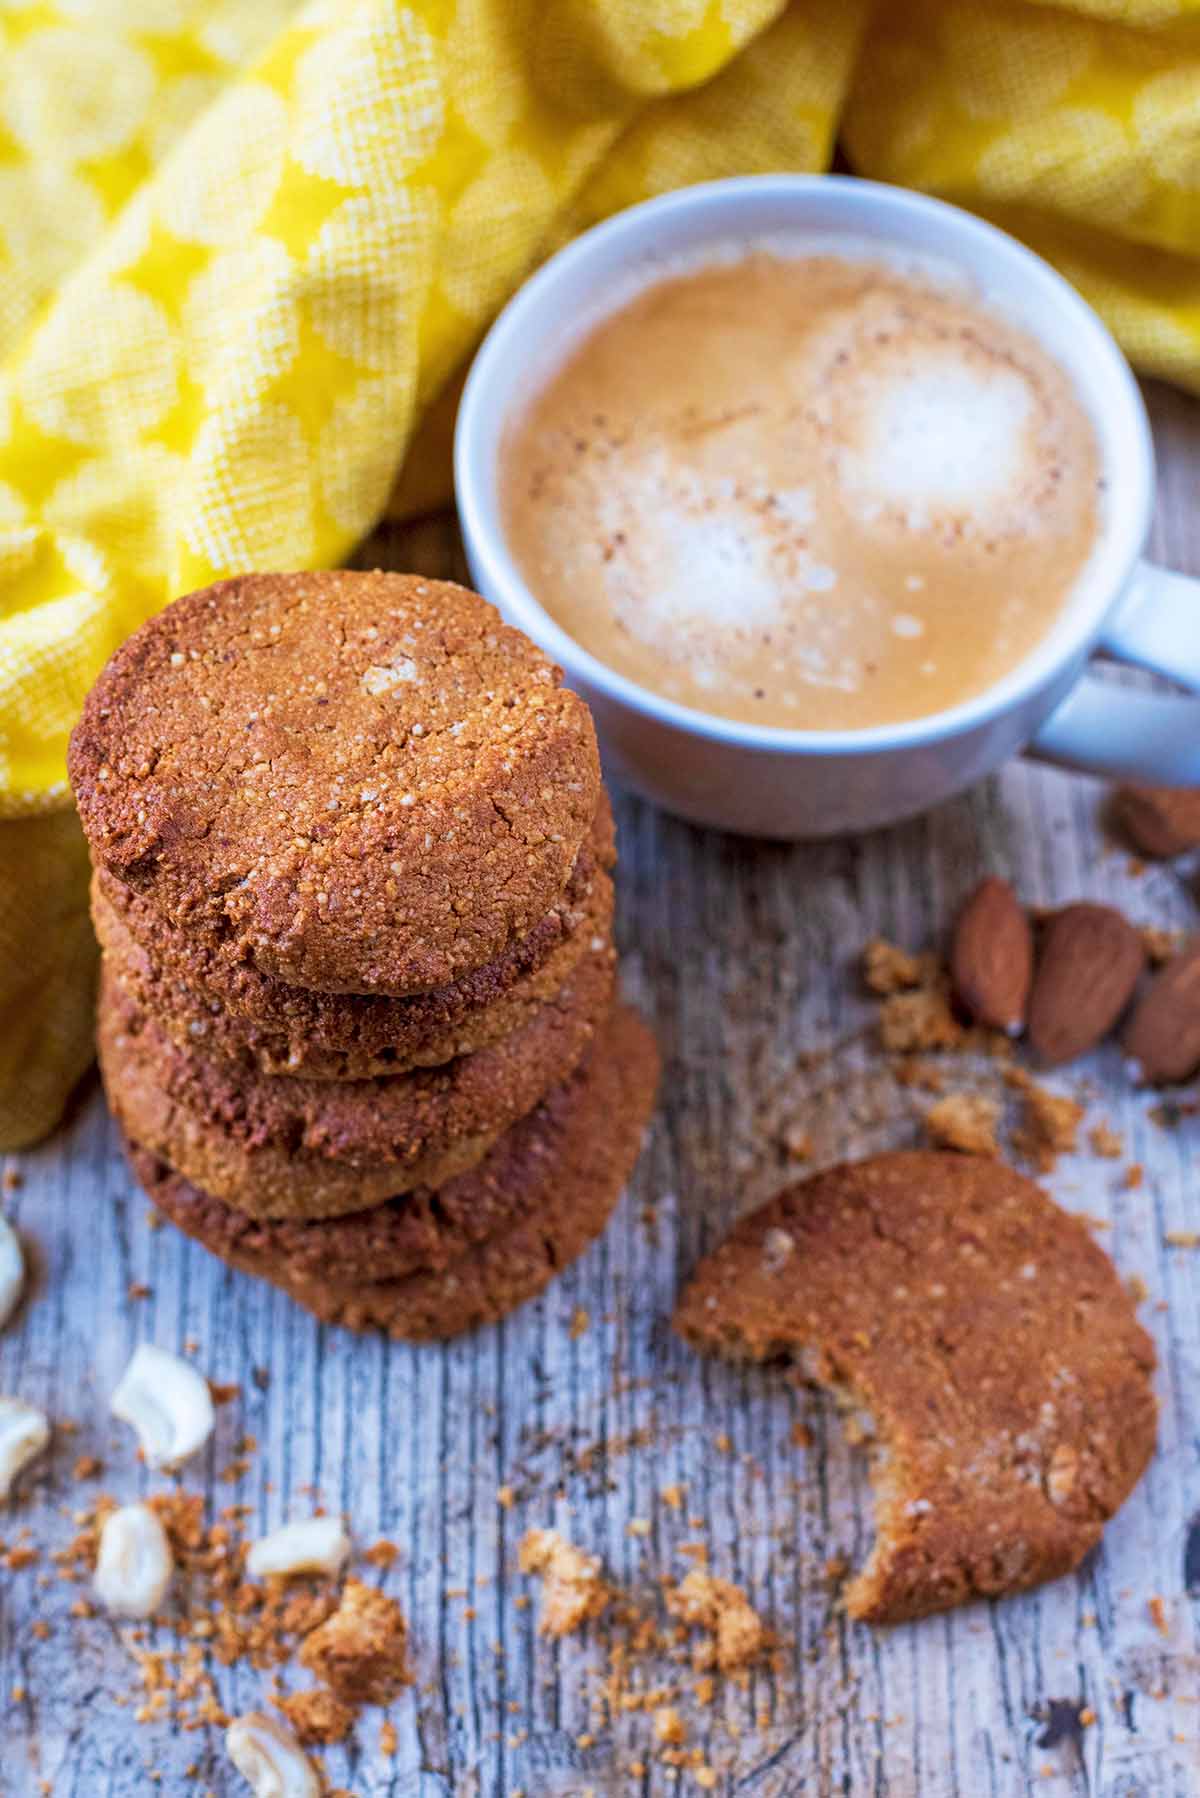 Gingernuts next to a cup of coffee and a yellow towel.